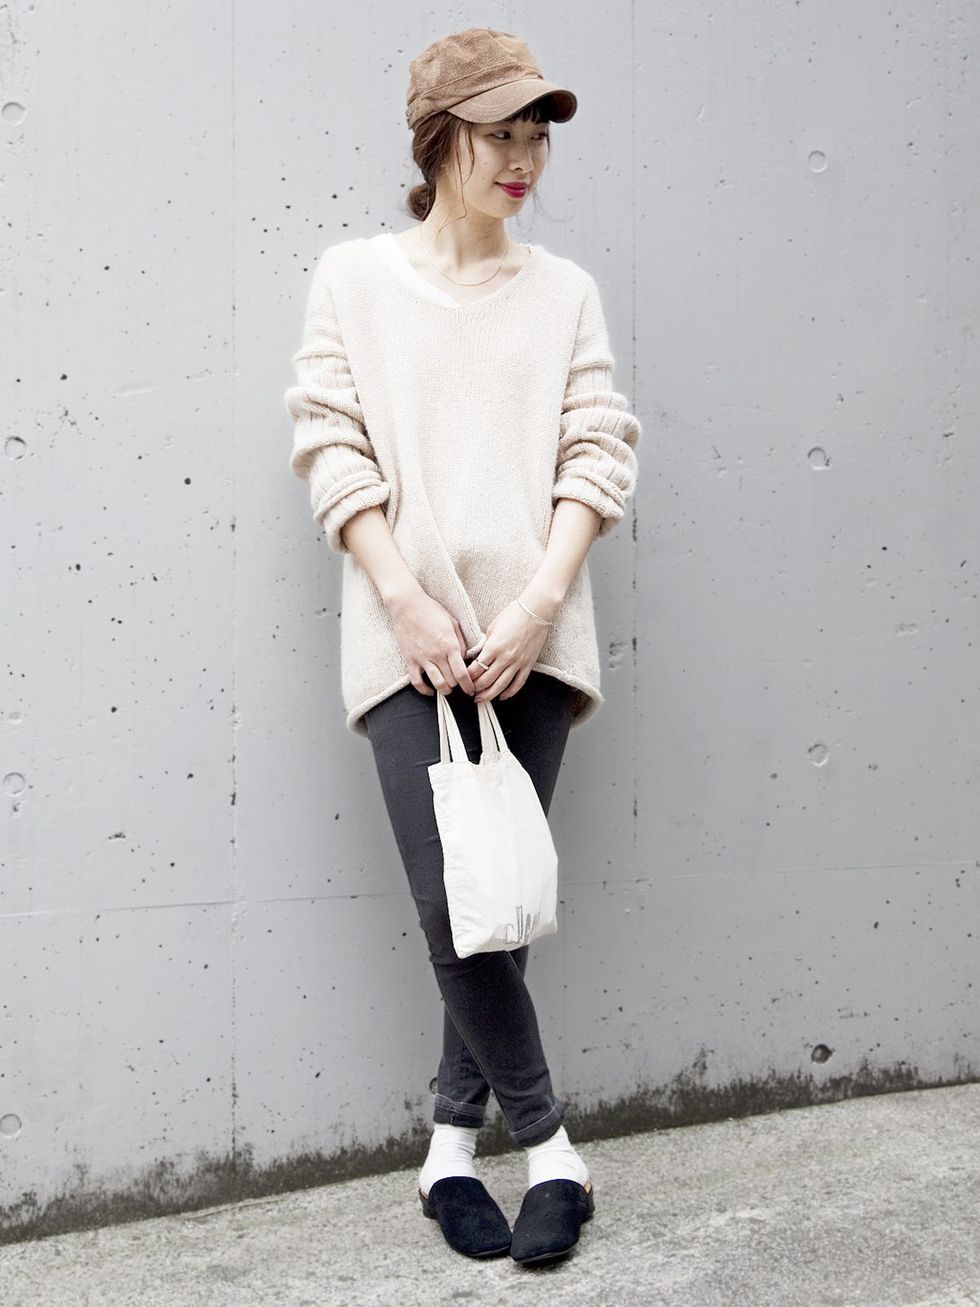 Sleeve, Shoulder, Outerwear, Standing, White, Style, Street fashion, Knee, Cap, Grey, 